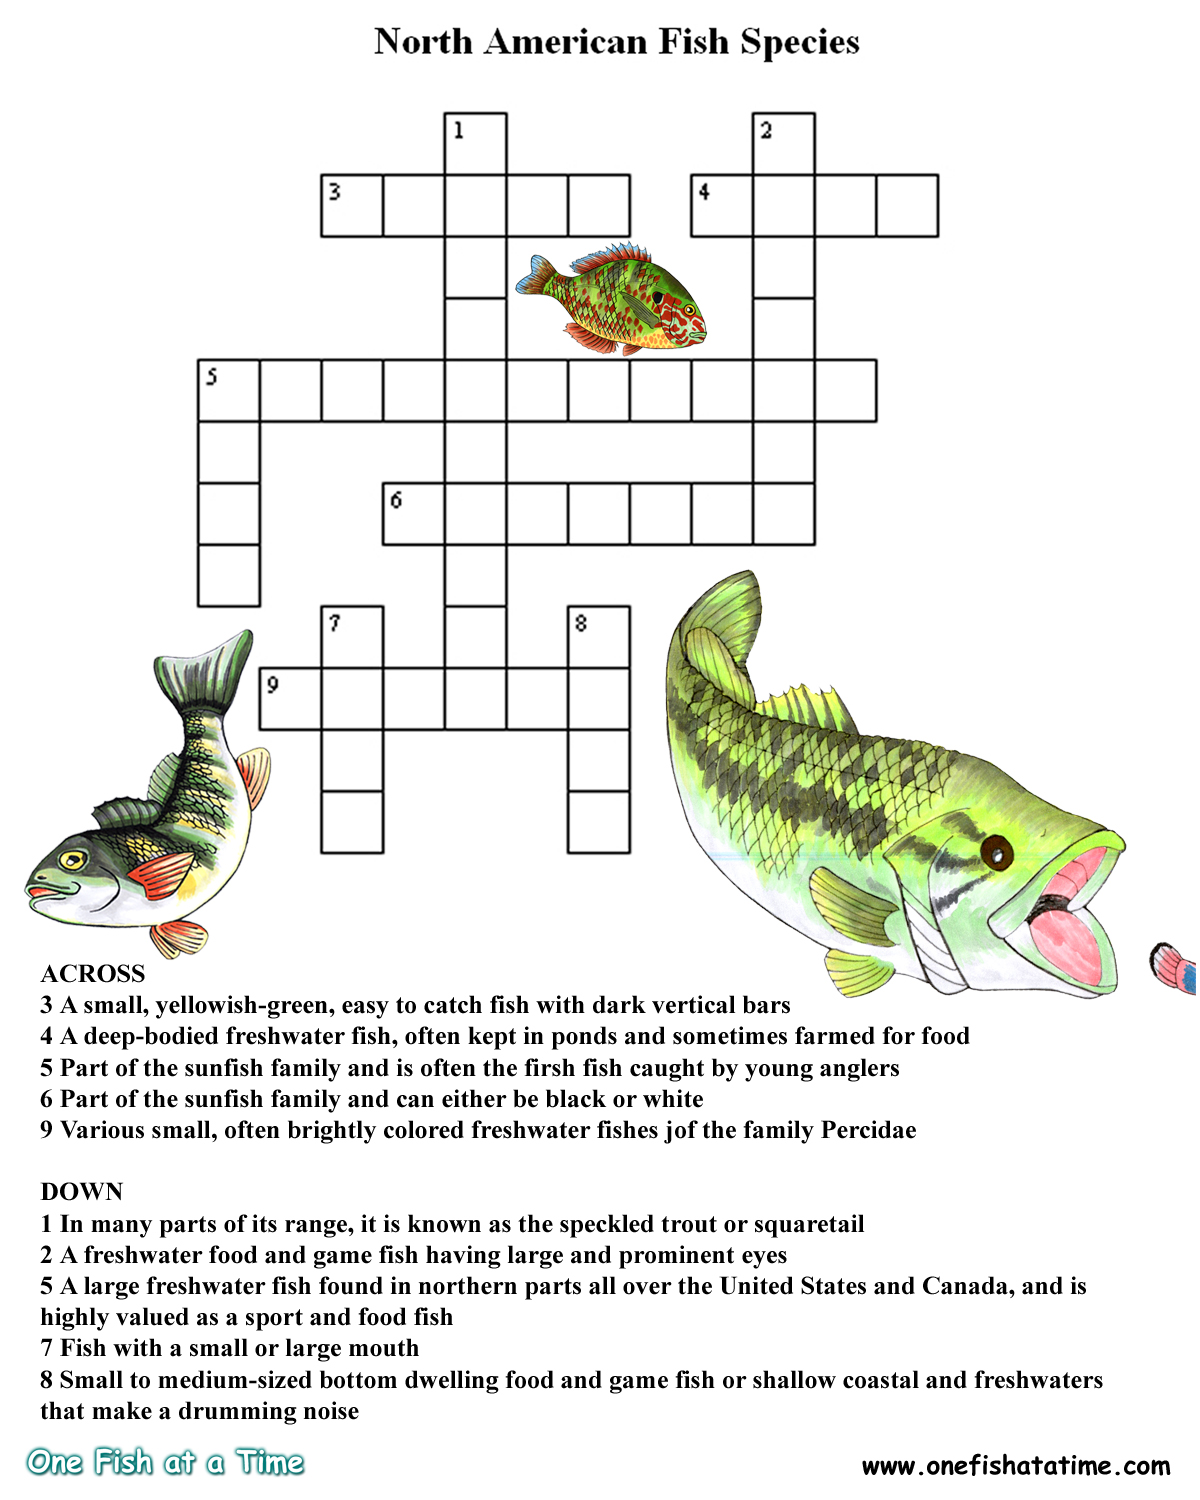 Crosswords One Fish at a Time